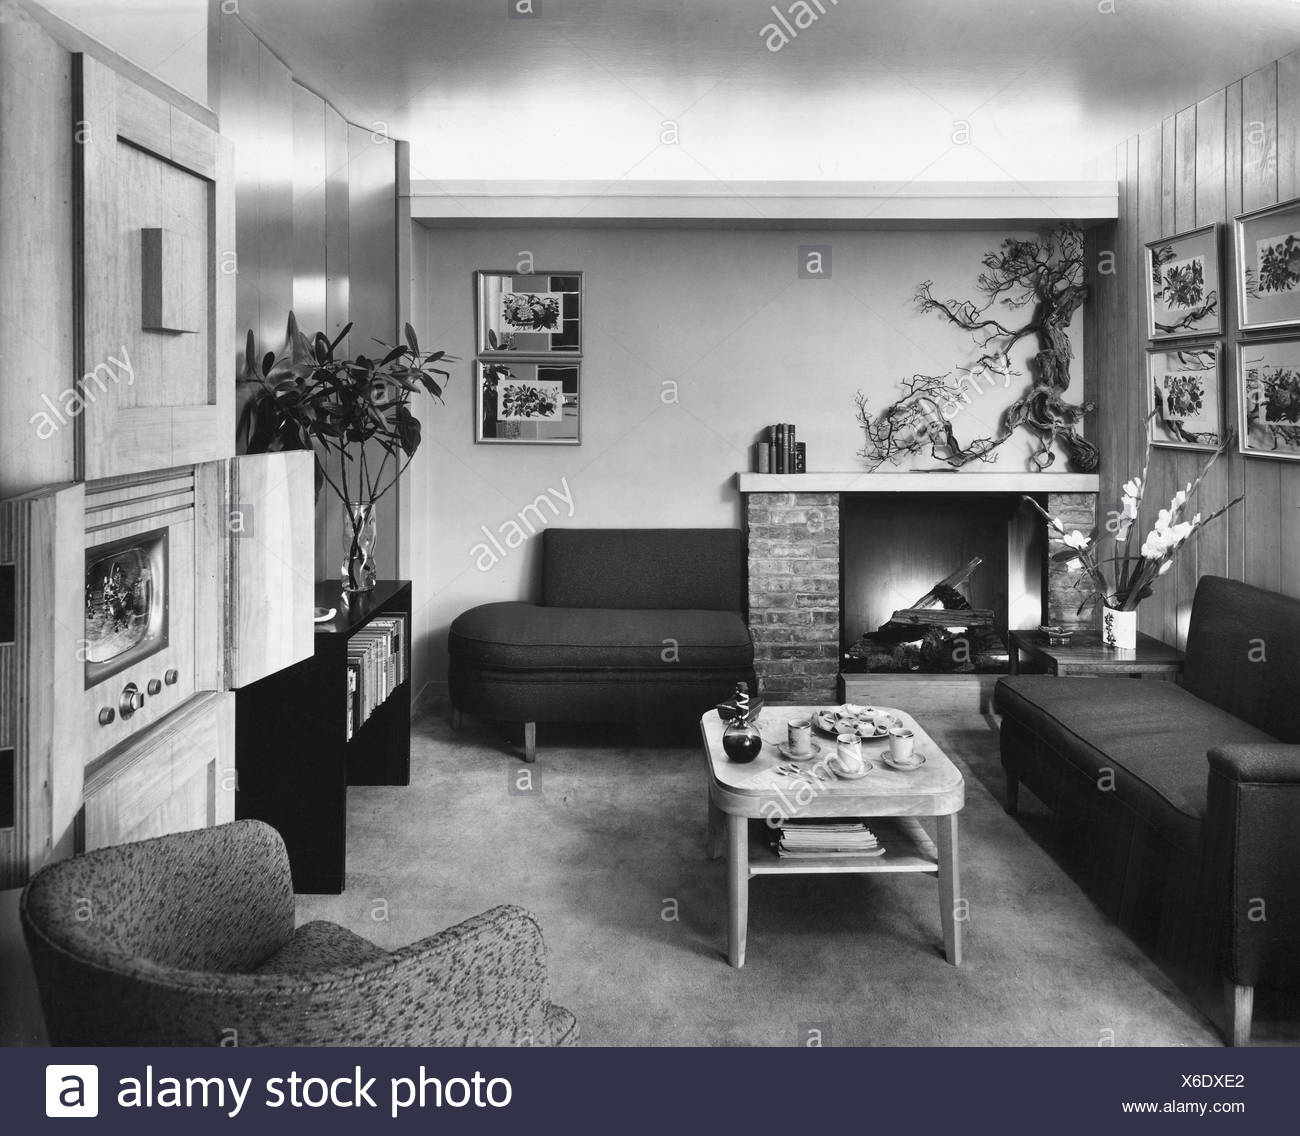 Interior Of Living Room 1950s Style Stock Photo 279359978